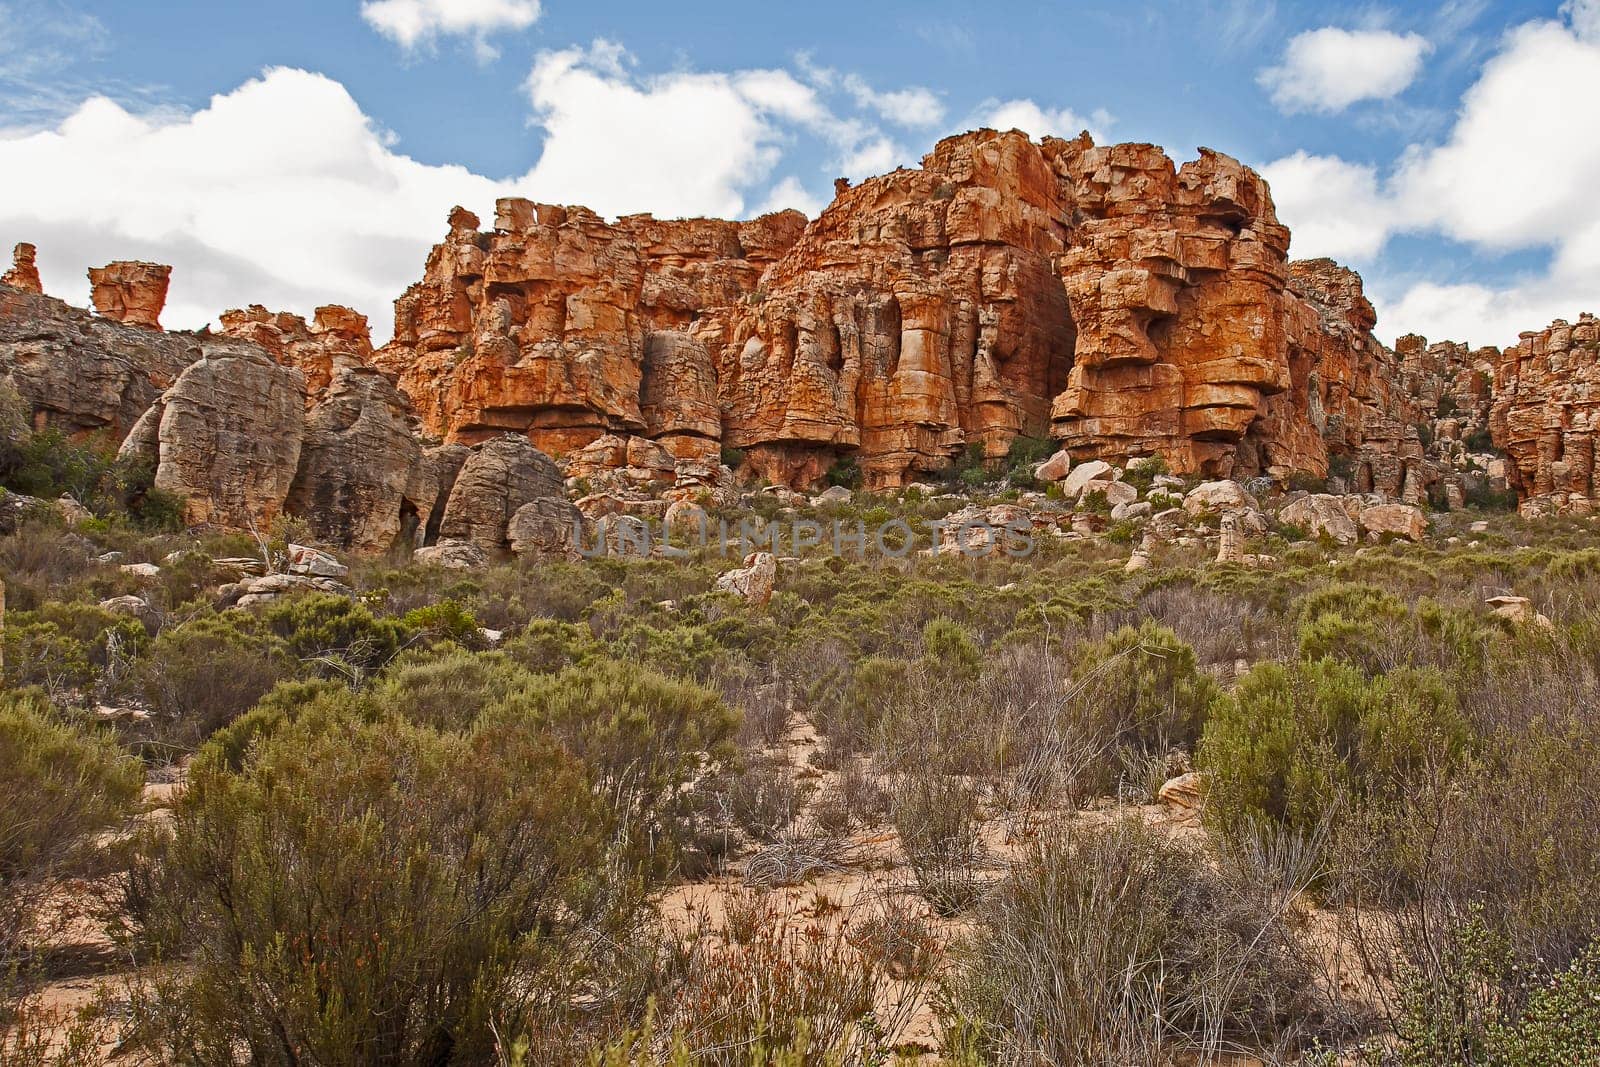 Cederberg Rock Formations 12815 by kobus_peche